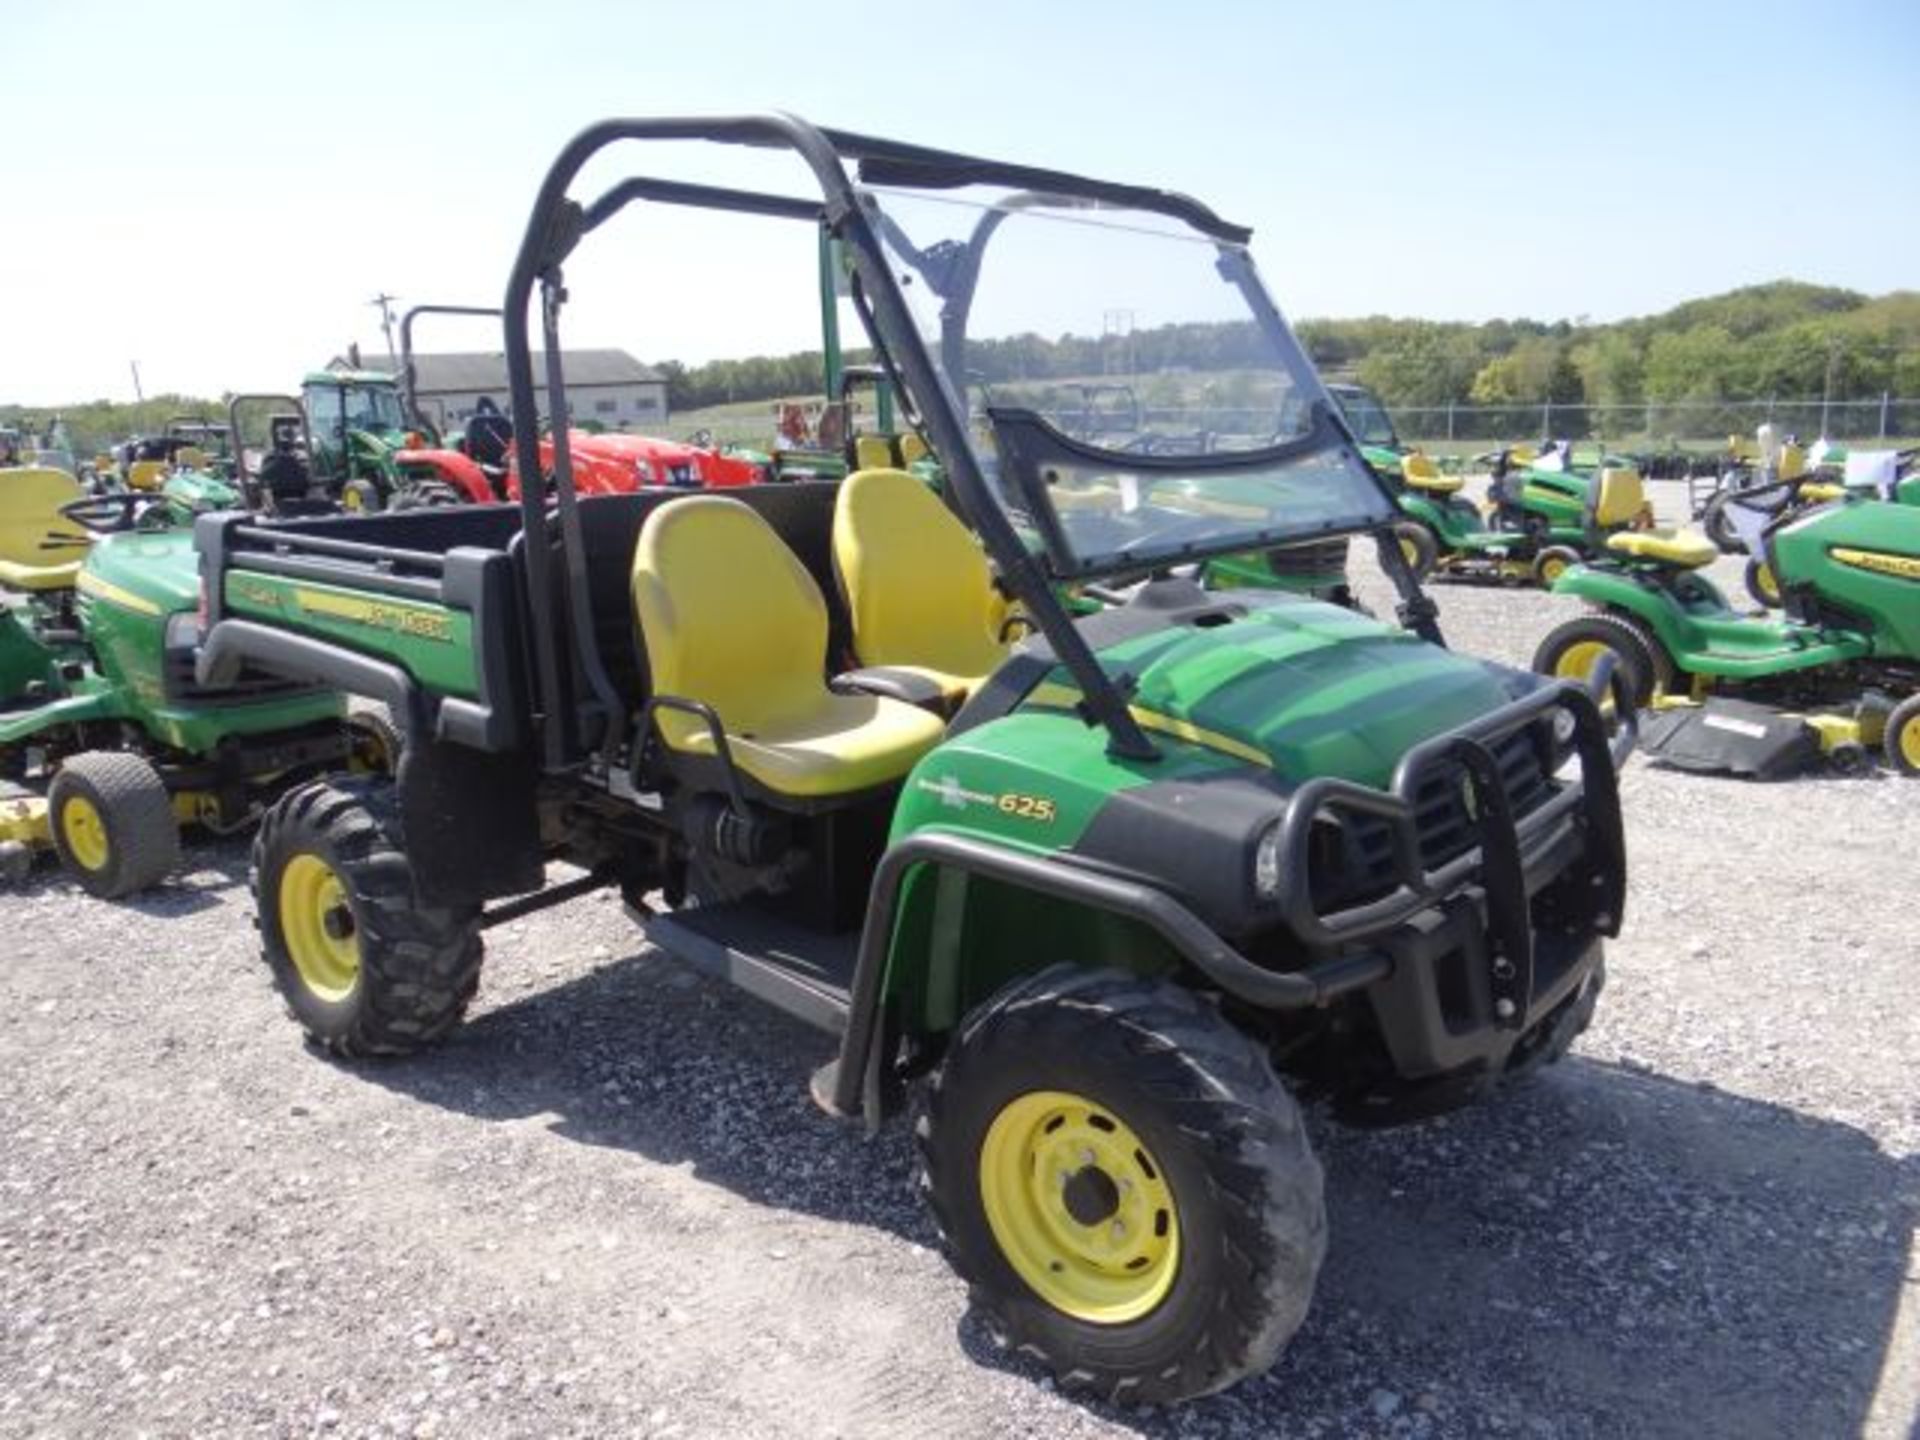 2011 JD 625i XUV Gator 992 hrs, Steel Wheels, Traction Tires, No Scratch Windshield, Bed Lift Kit, - Image 2 of 3